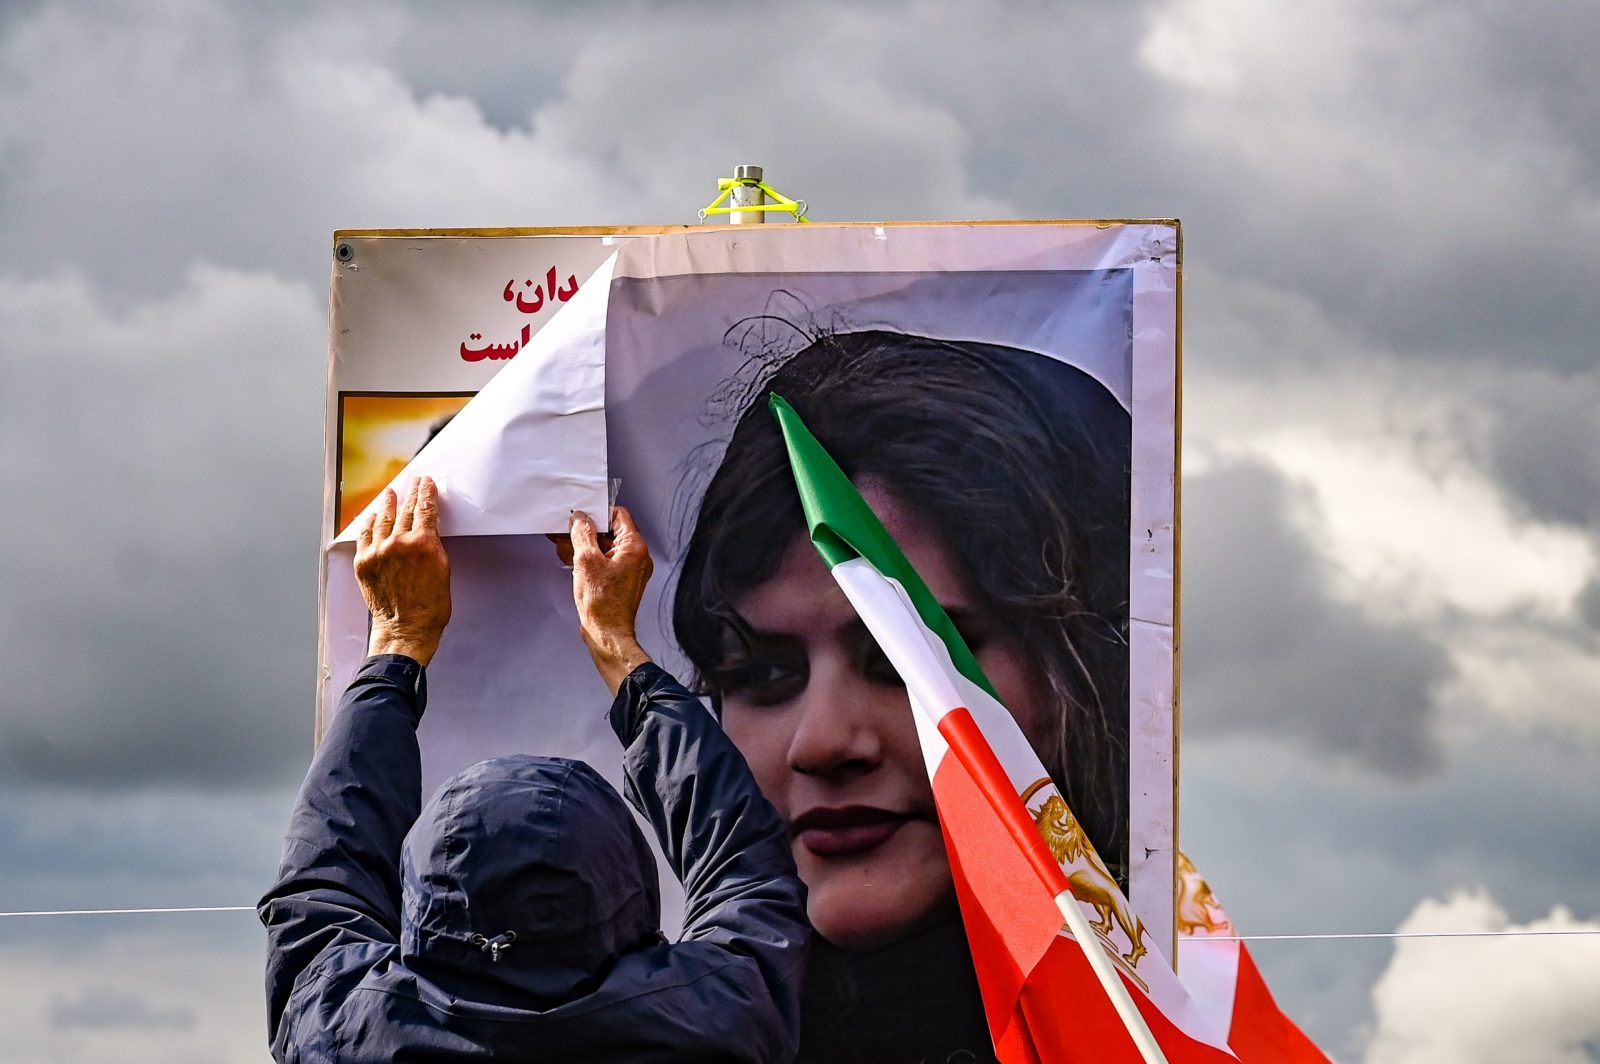 epa10211353 A participant prepares posters of Mahsa Amini during a rally in front of the Reichstag building in Berlin, Germany, 28 September 2022. Iran has been facing many anti-government protests following the death of Mahsa Amini, a 22-year-old Iranian woman, who was arrested in Tehran on 13 September by the morality police, a unit responsible for enforcing Iran's strict dress code for women and died while in their custody.  EPA/FILIP SINGER